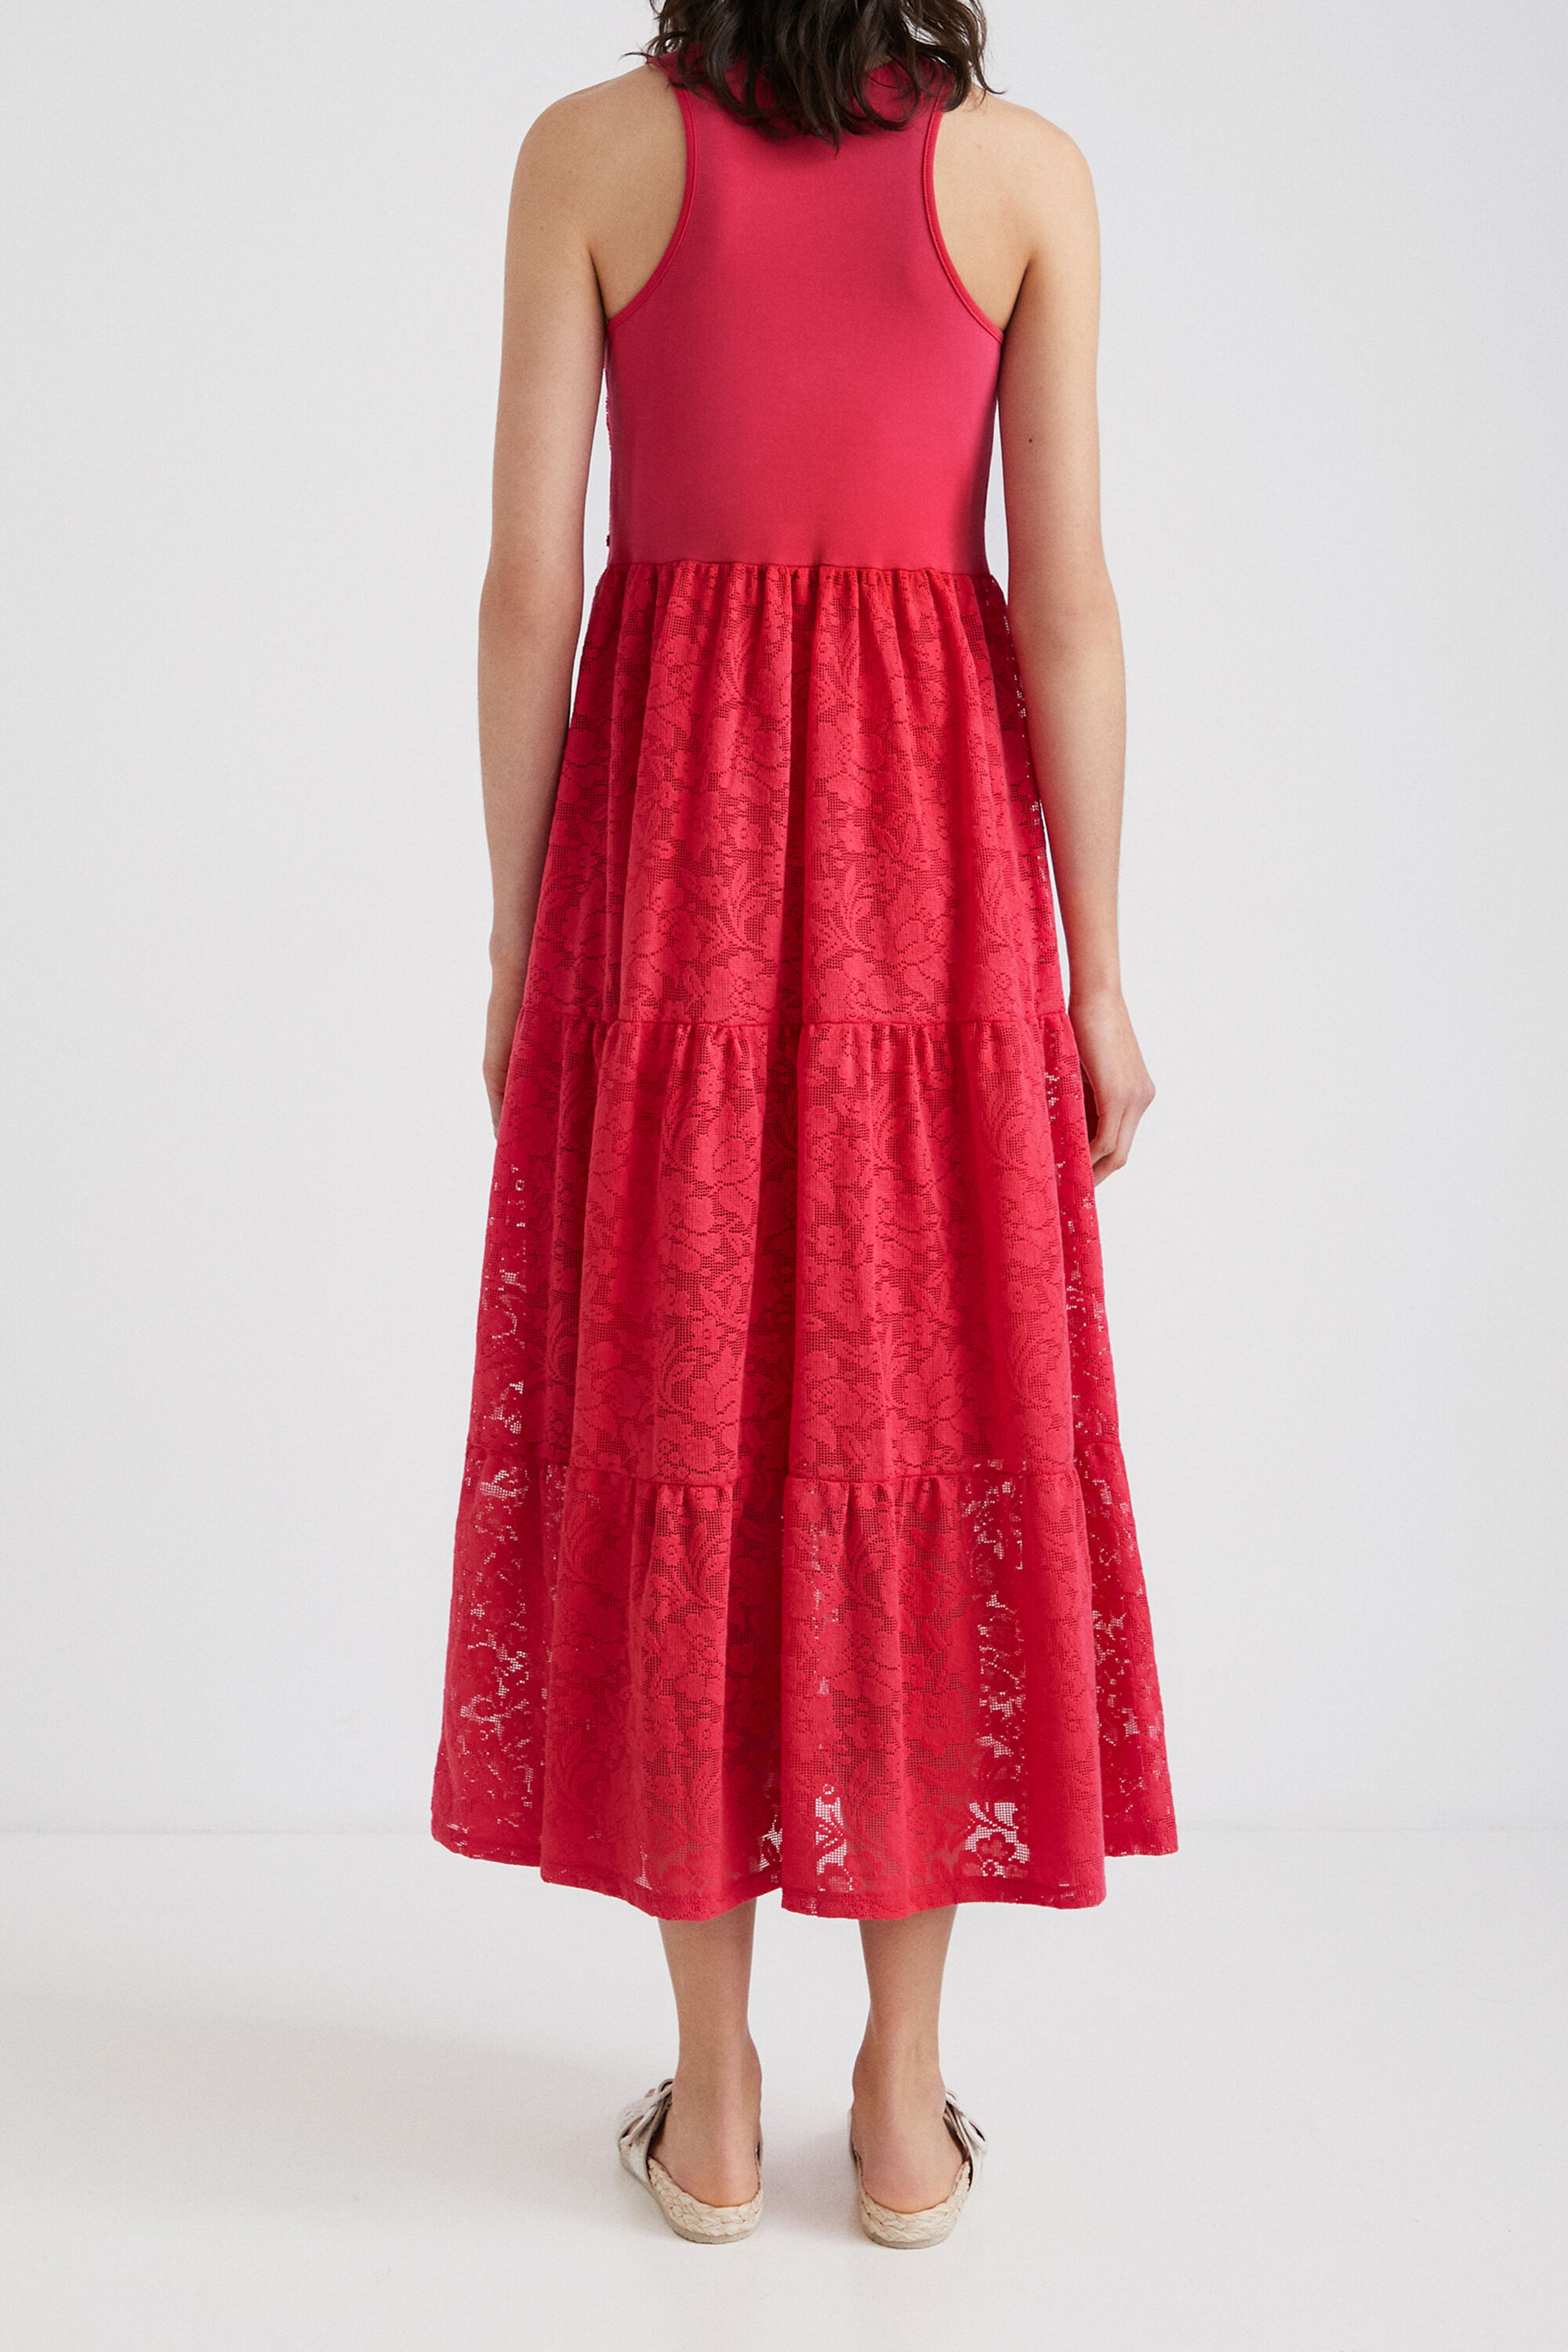 Shop Desigual Ethnic Lace Dress In Red